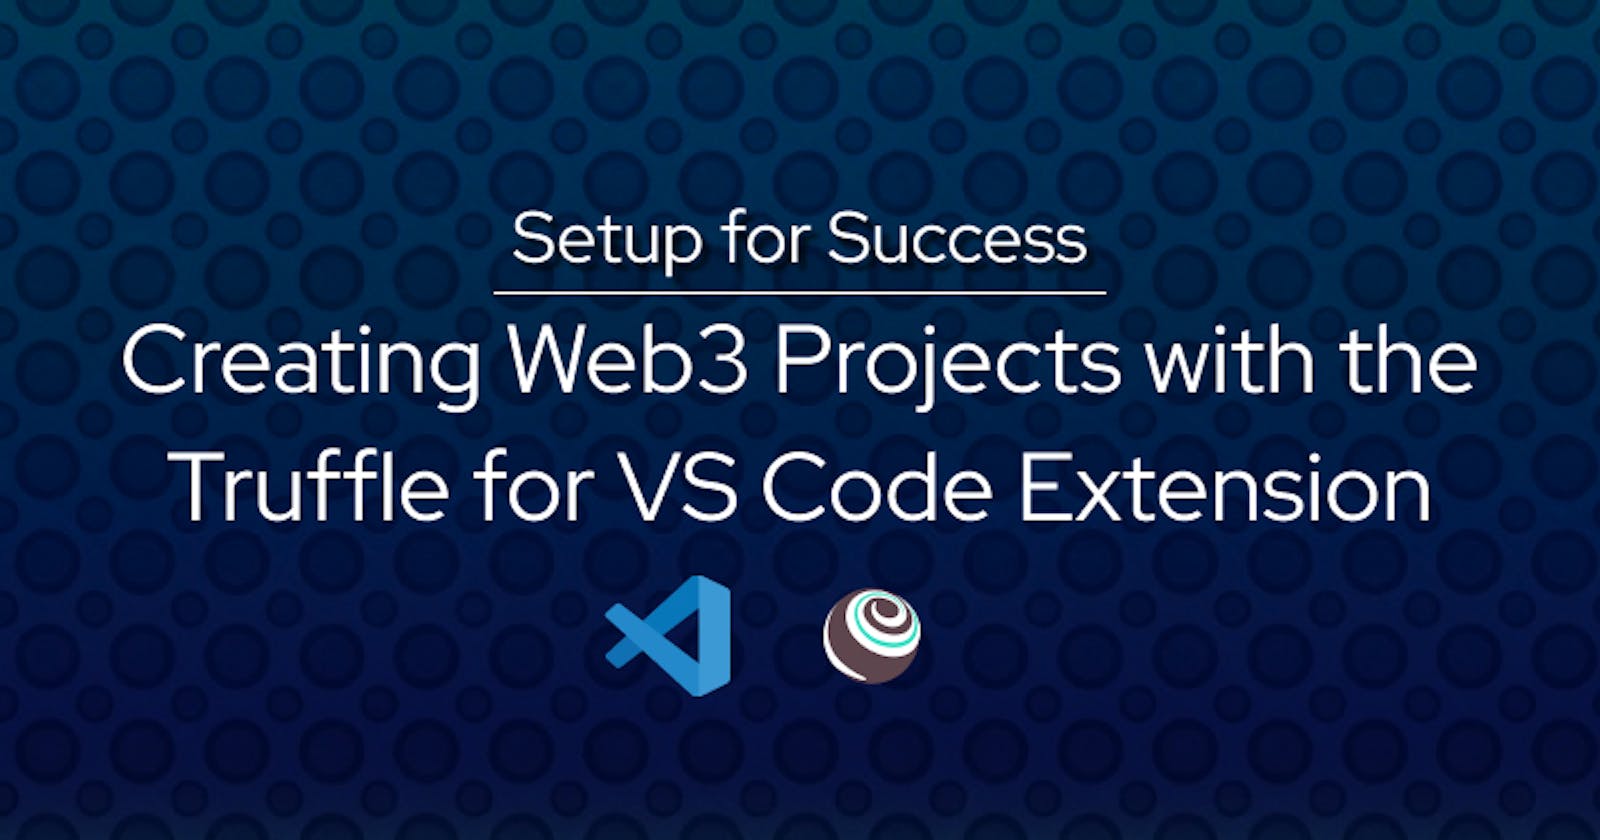 Setup for Success: Creating Web3 Projects with the Truffle for VS Code Extension